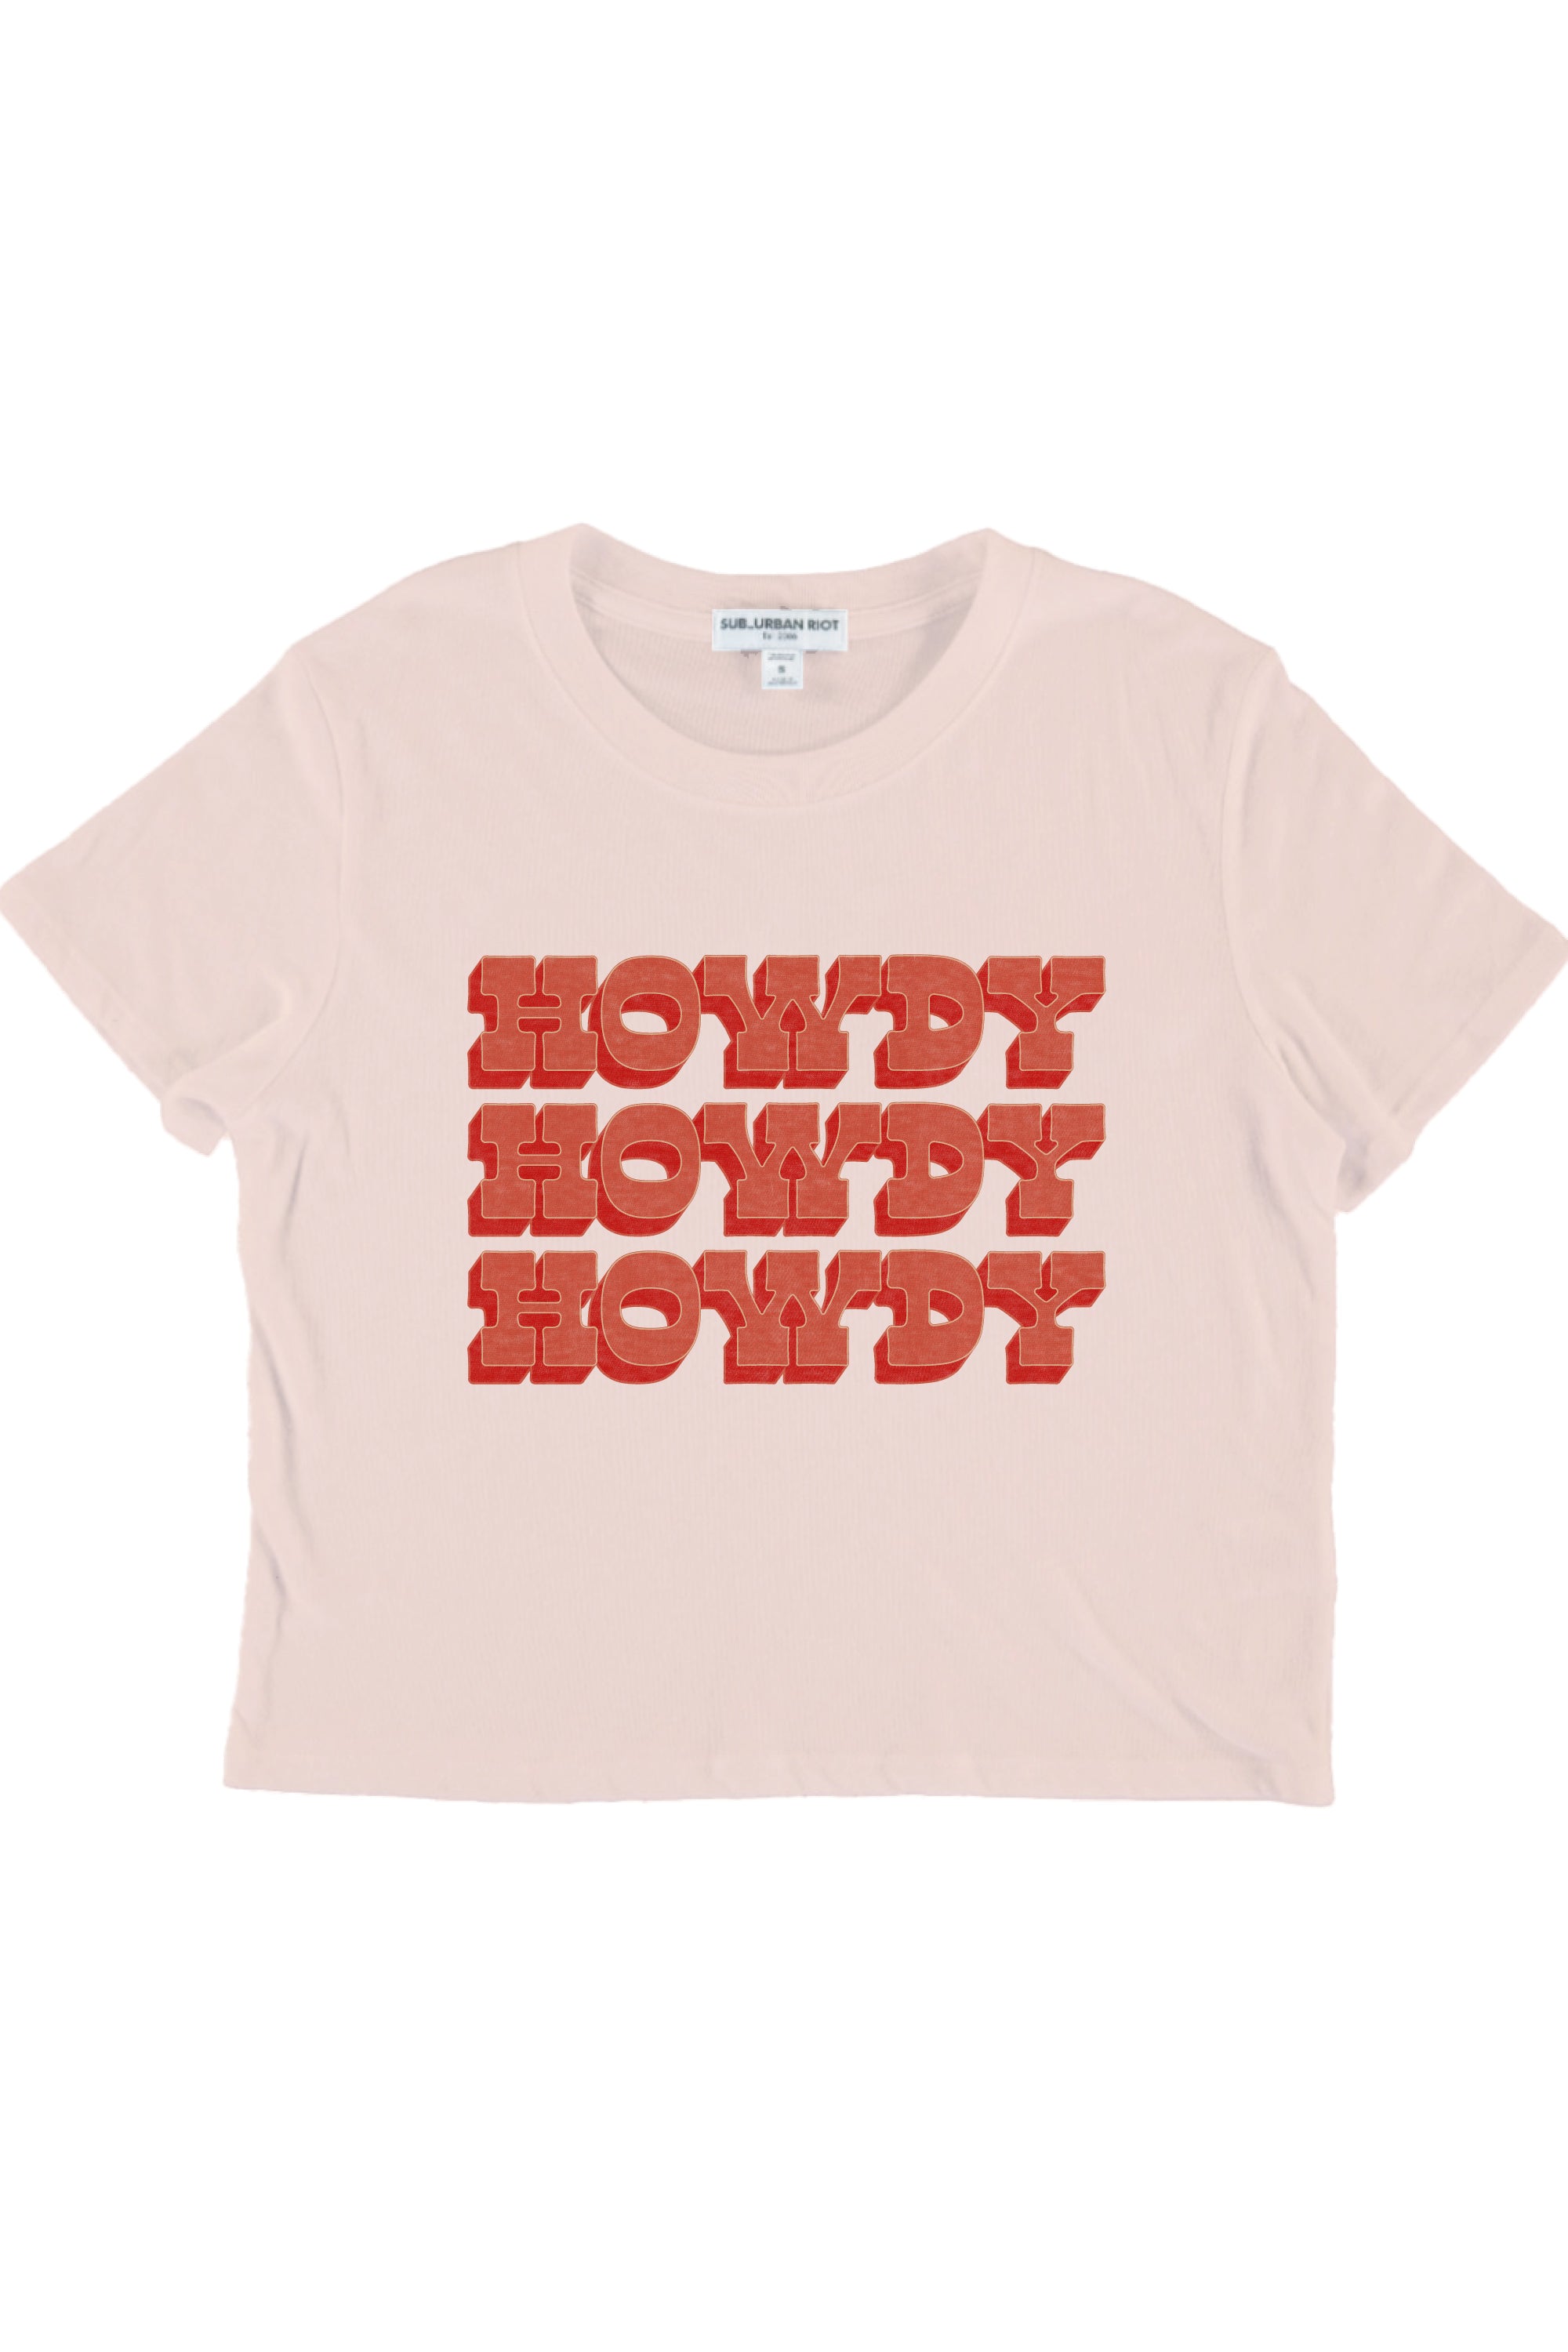 HOWDY YOUTH SIZE CROP TEE